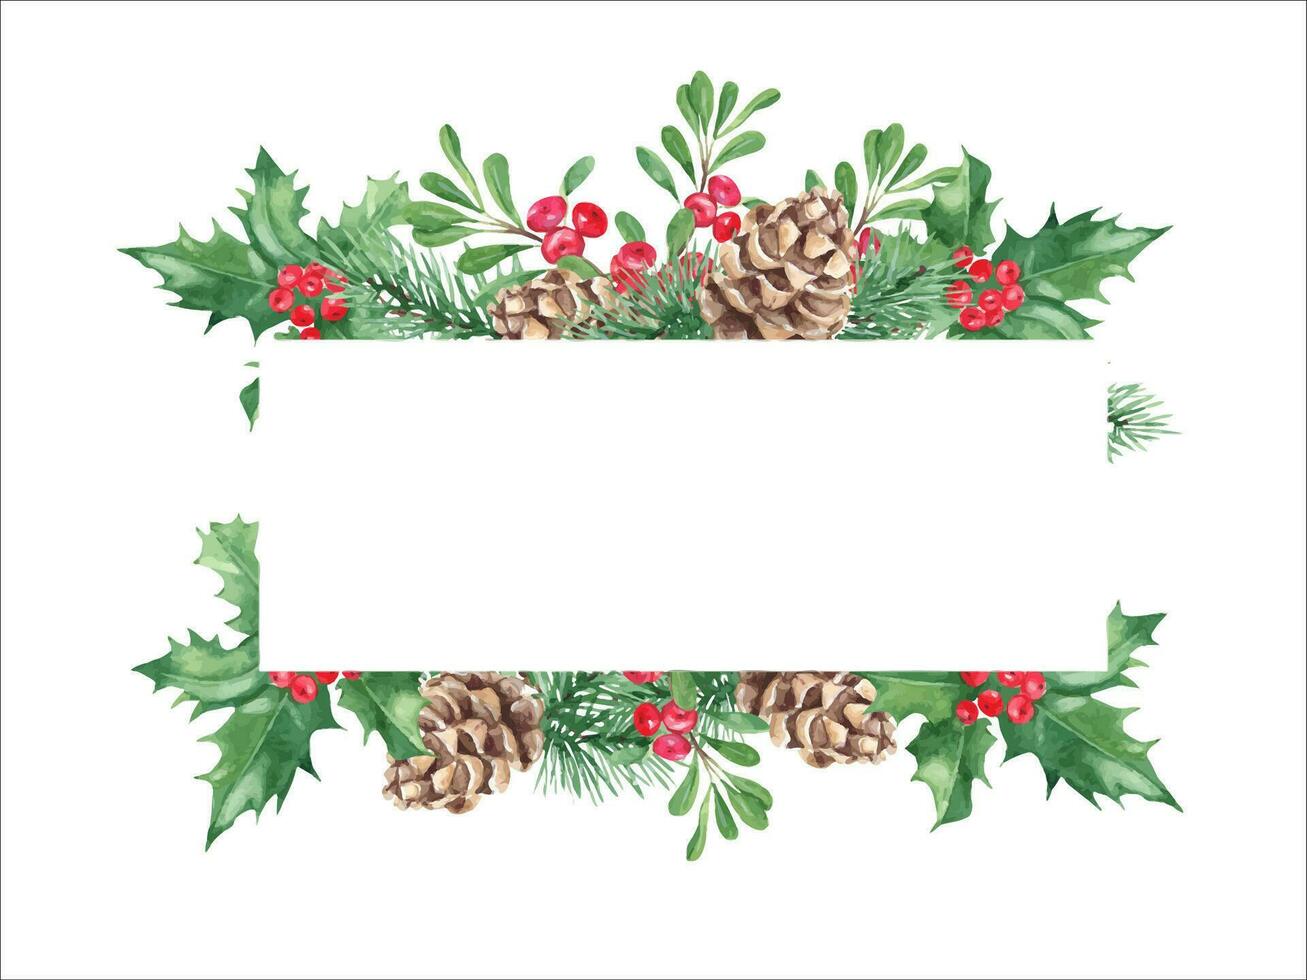 Christmas horizontal frame with winter plants, pine cone and branches, Holly plant with red berries, cowberry, lingonberry. Watercolor hand painted illustration. Good for cards, logos, decoration vector